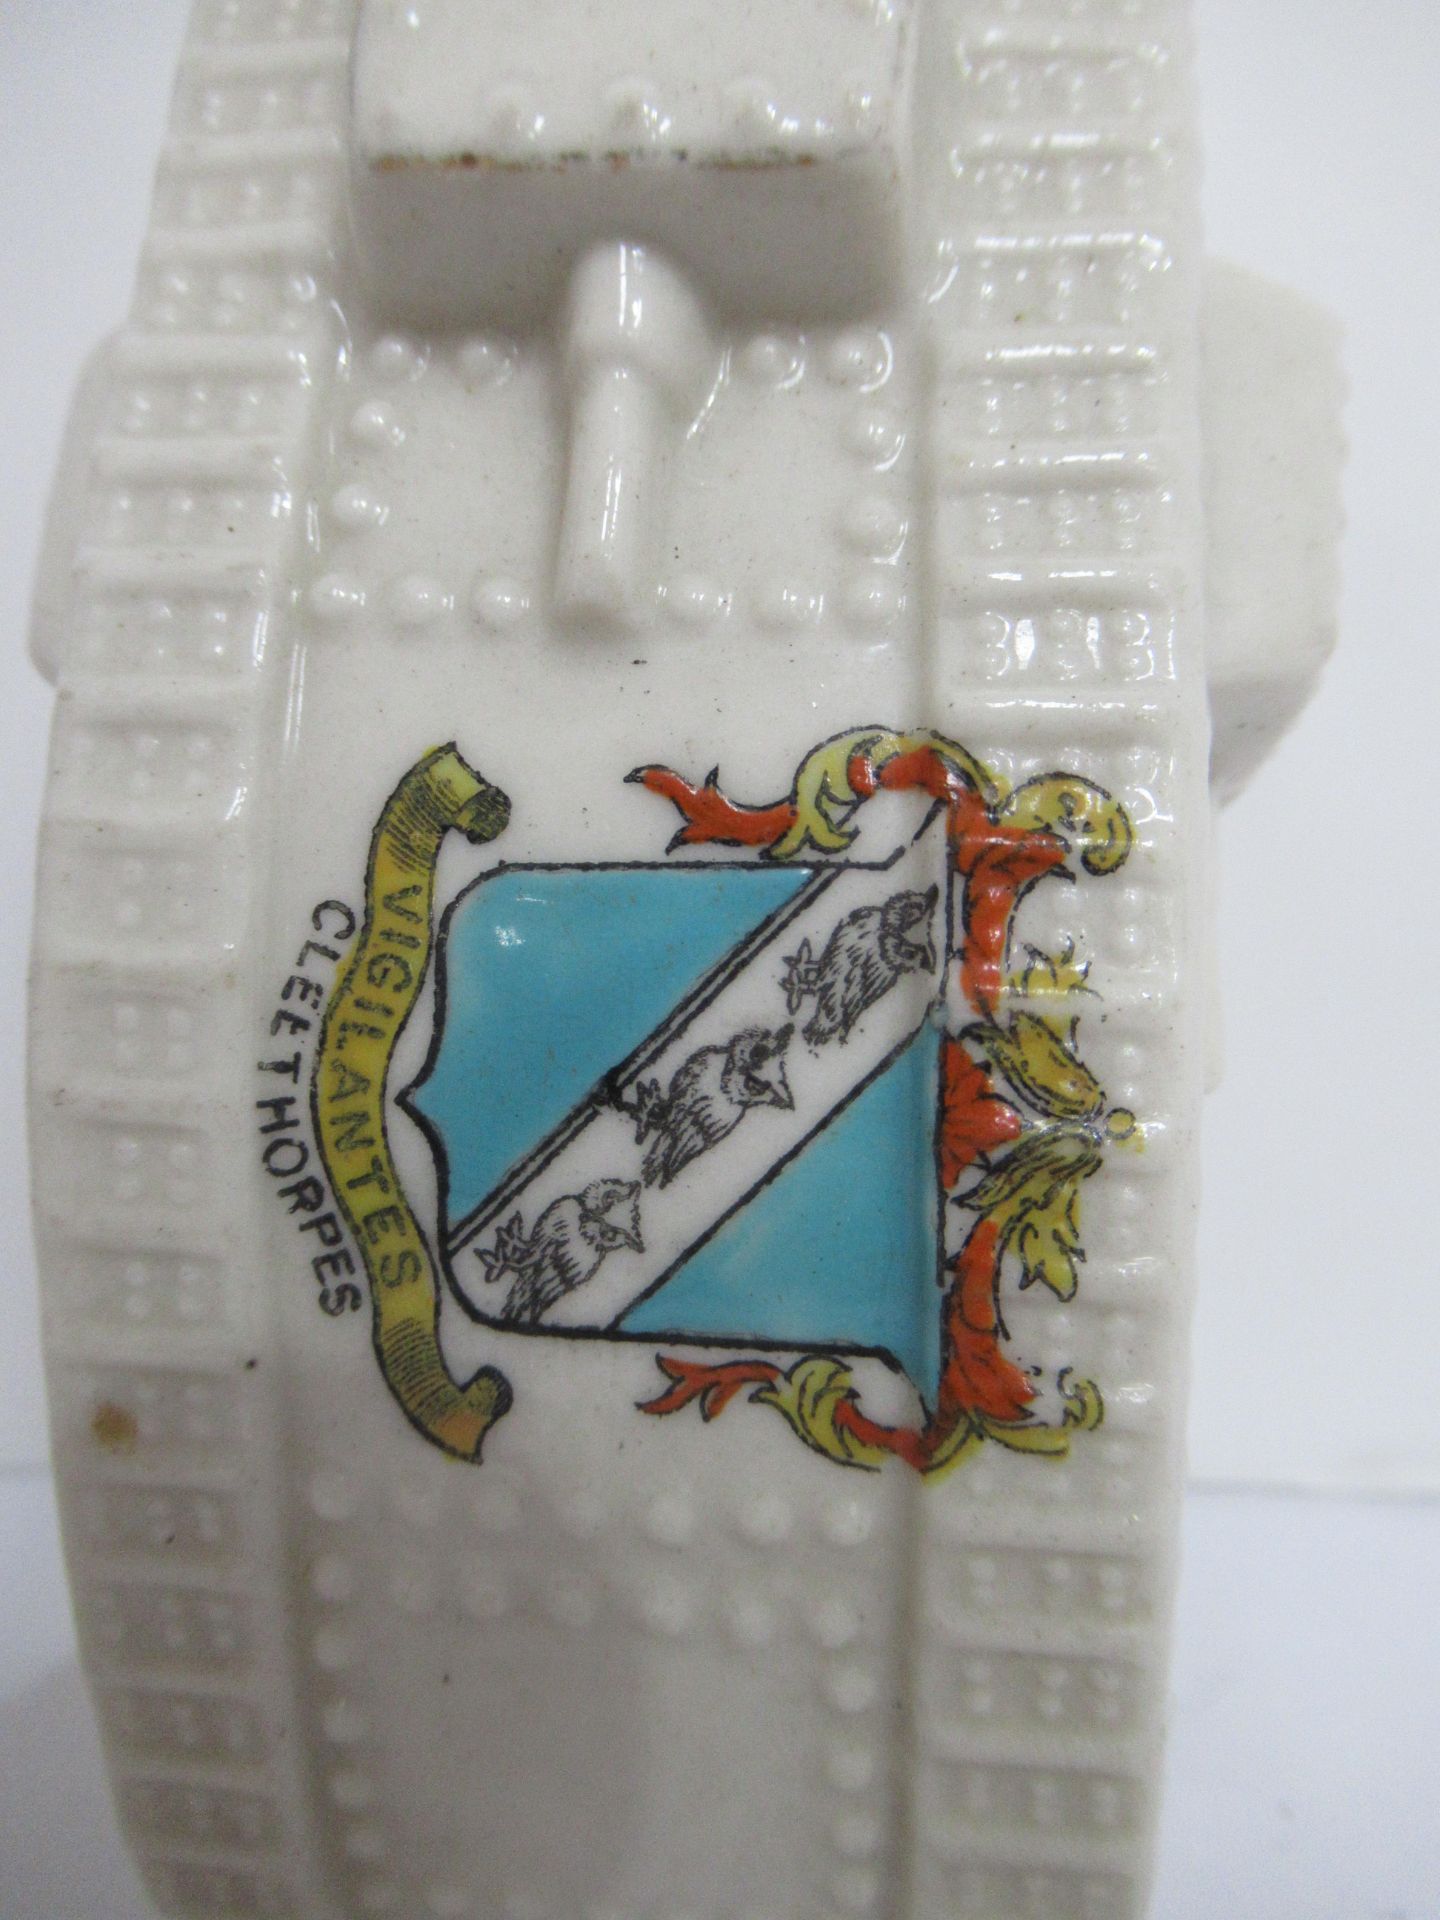 Crested China Arcadian model of tank with Grimsby coat of arms (90mm x 115mm) - Image 16 of 18